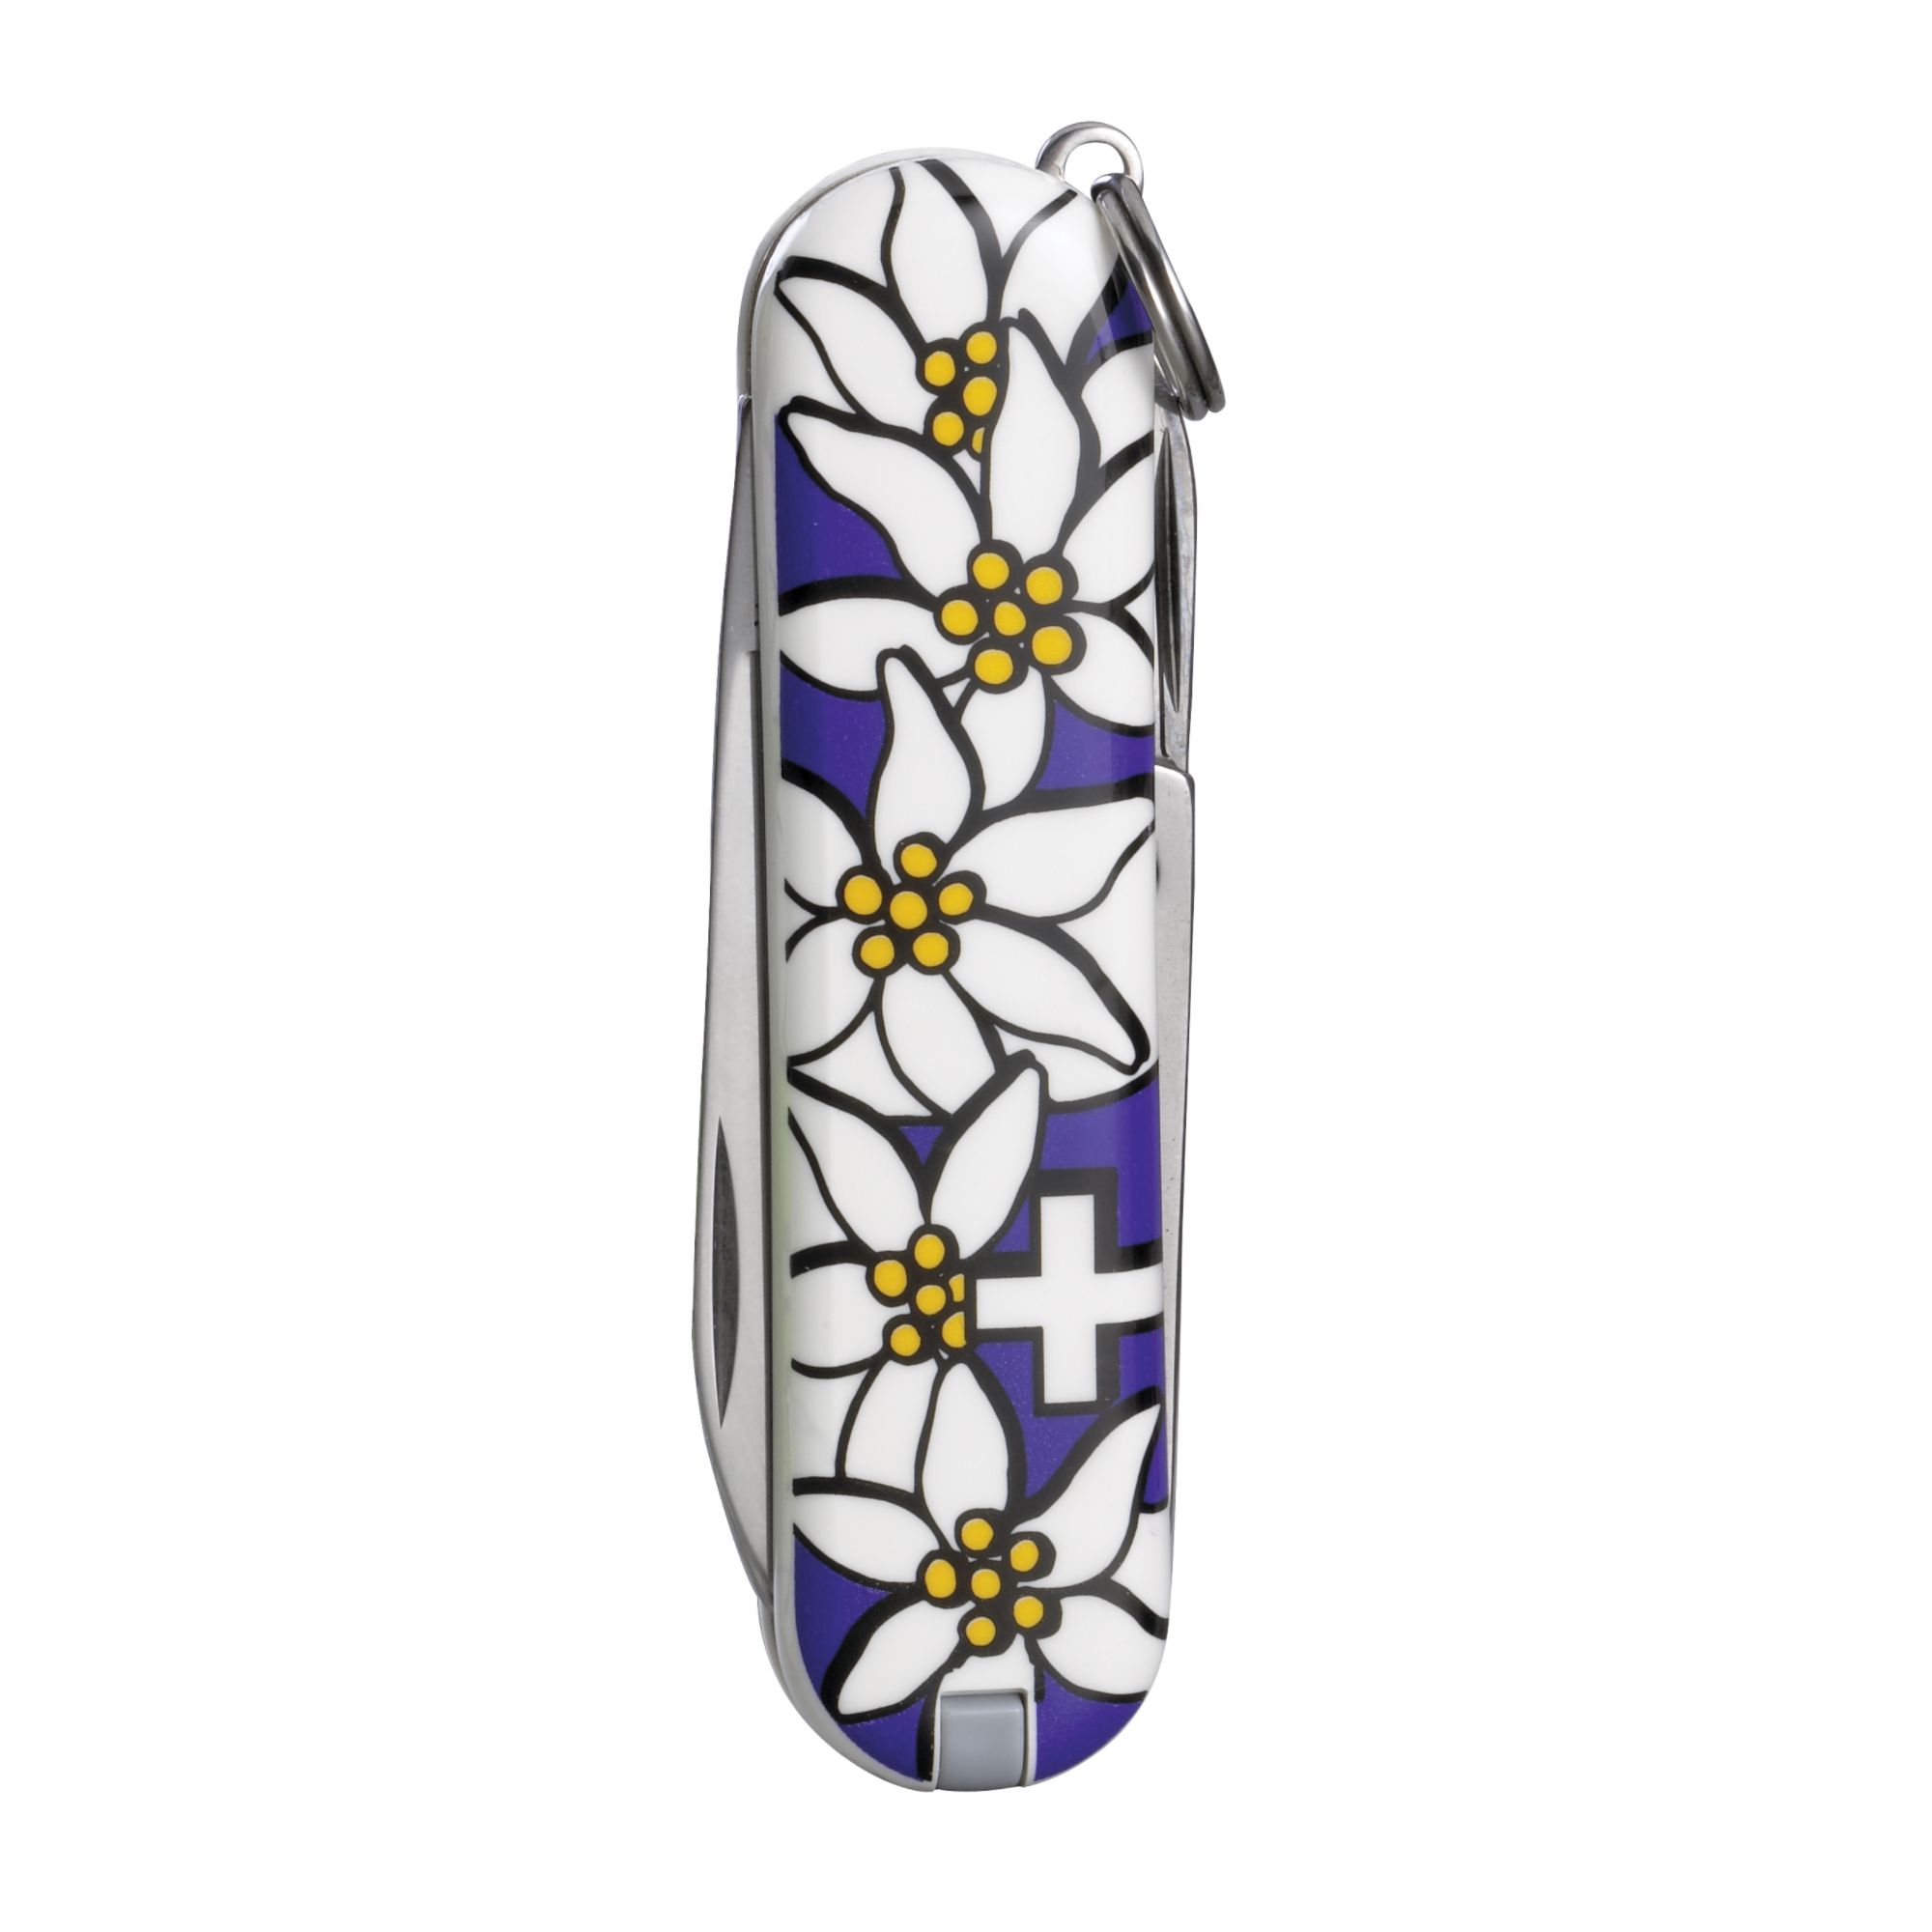 Victorinox Classic Edelweiss, Violet Swiss Army Pocket Knife